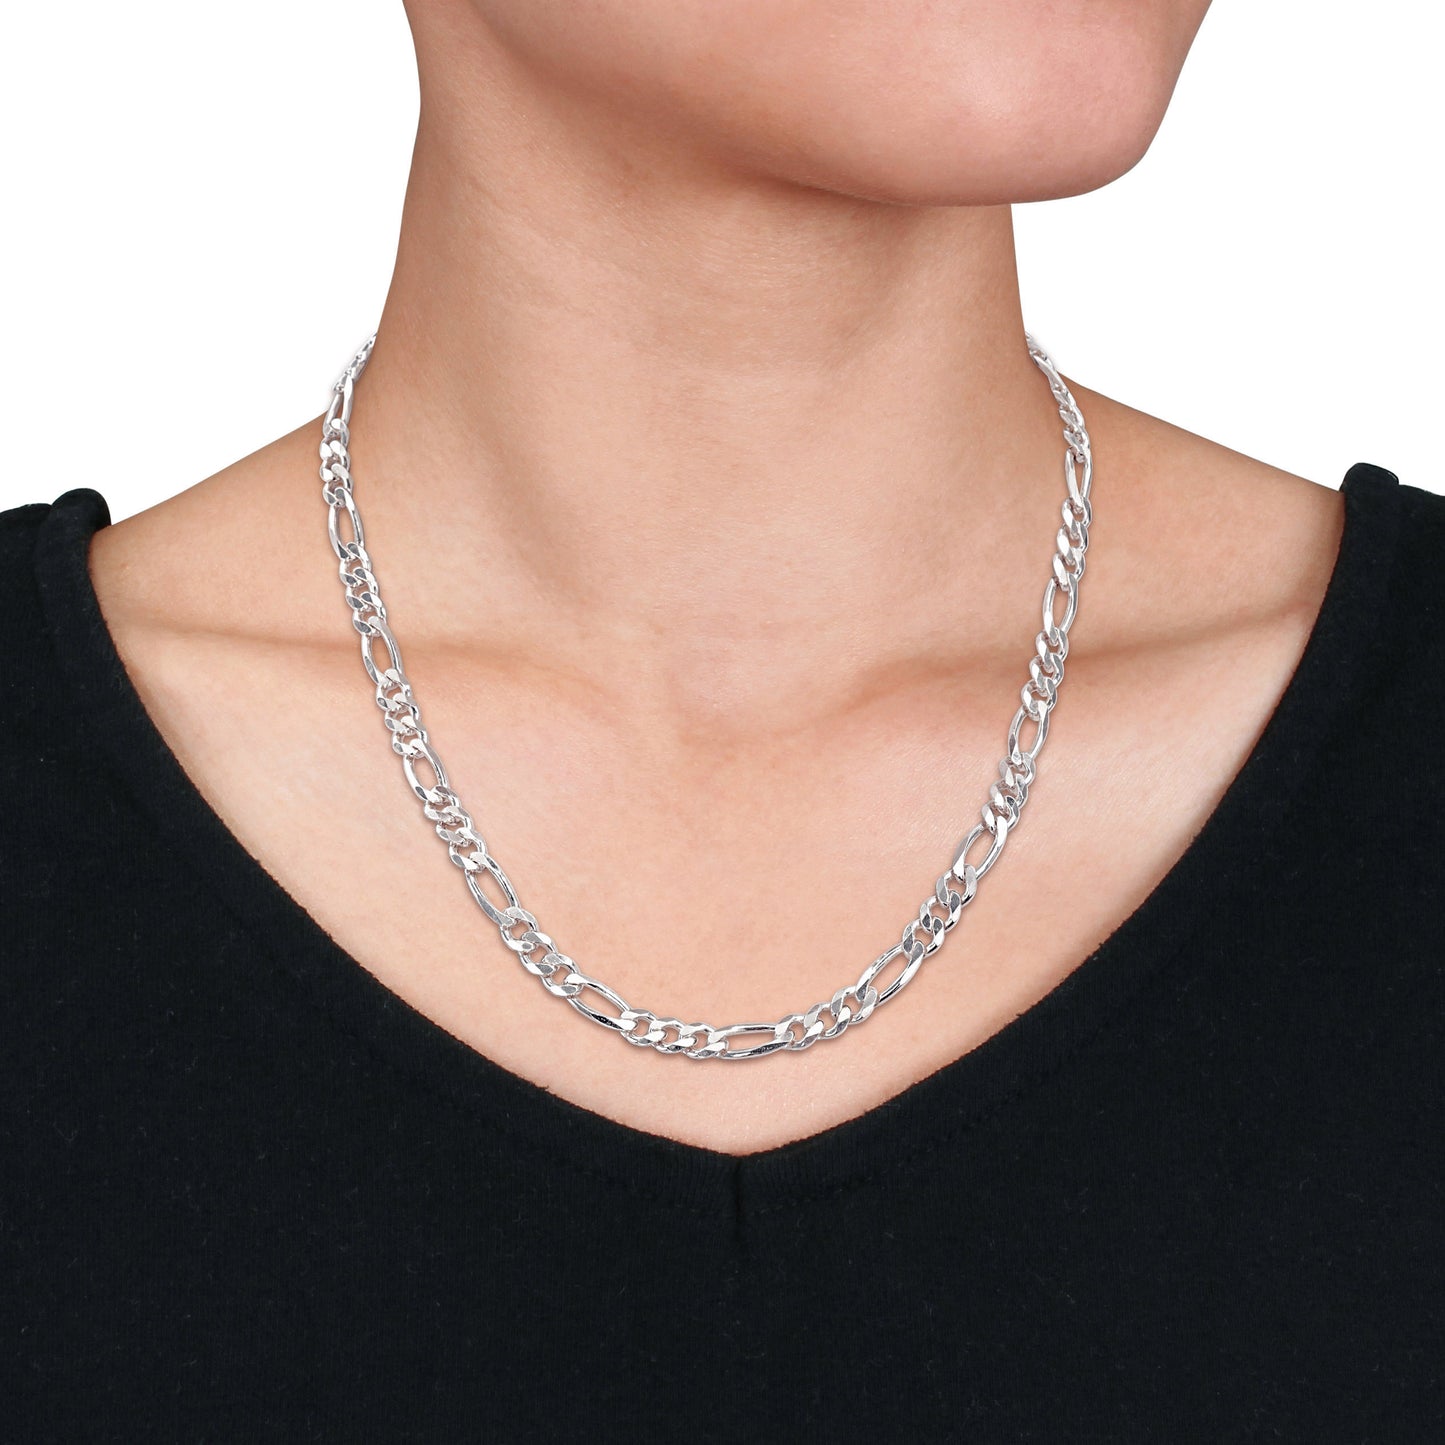 Sterling Silver Figaro Chain in 5.7mm